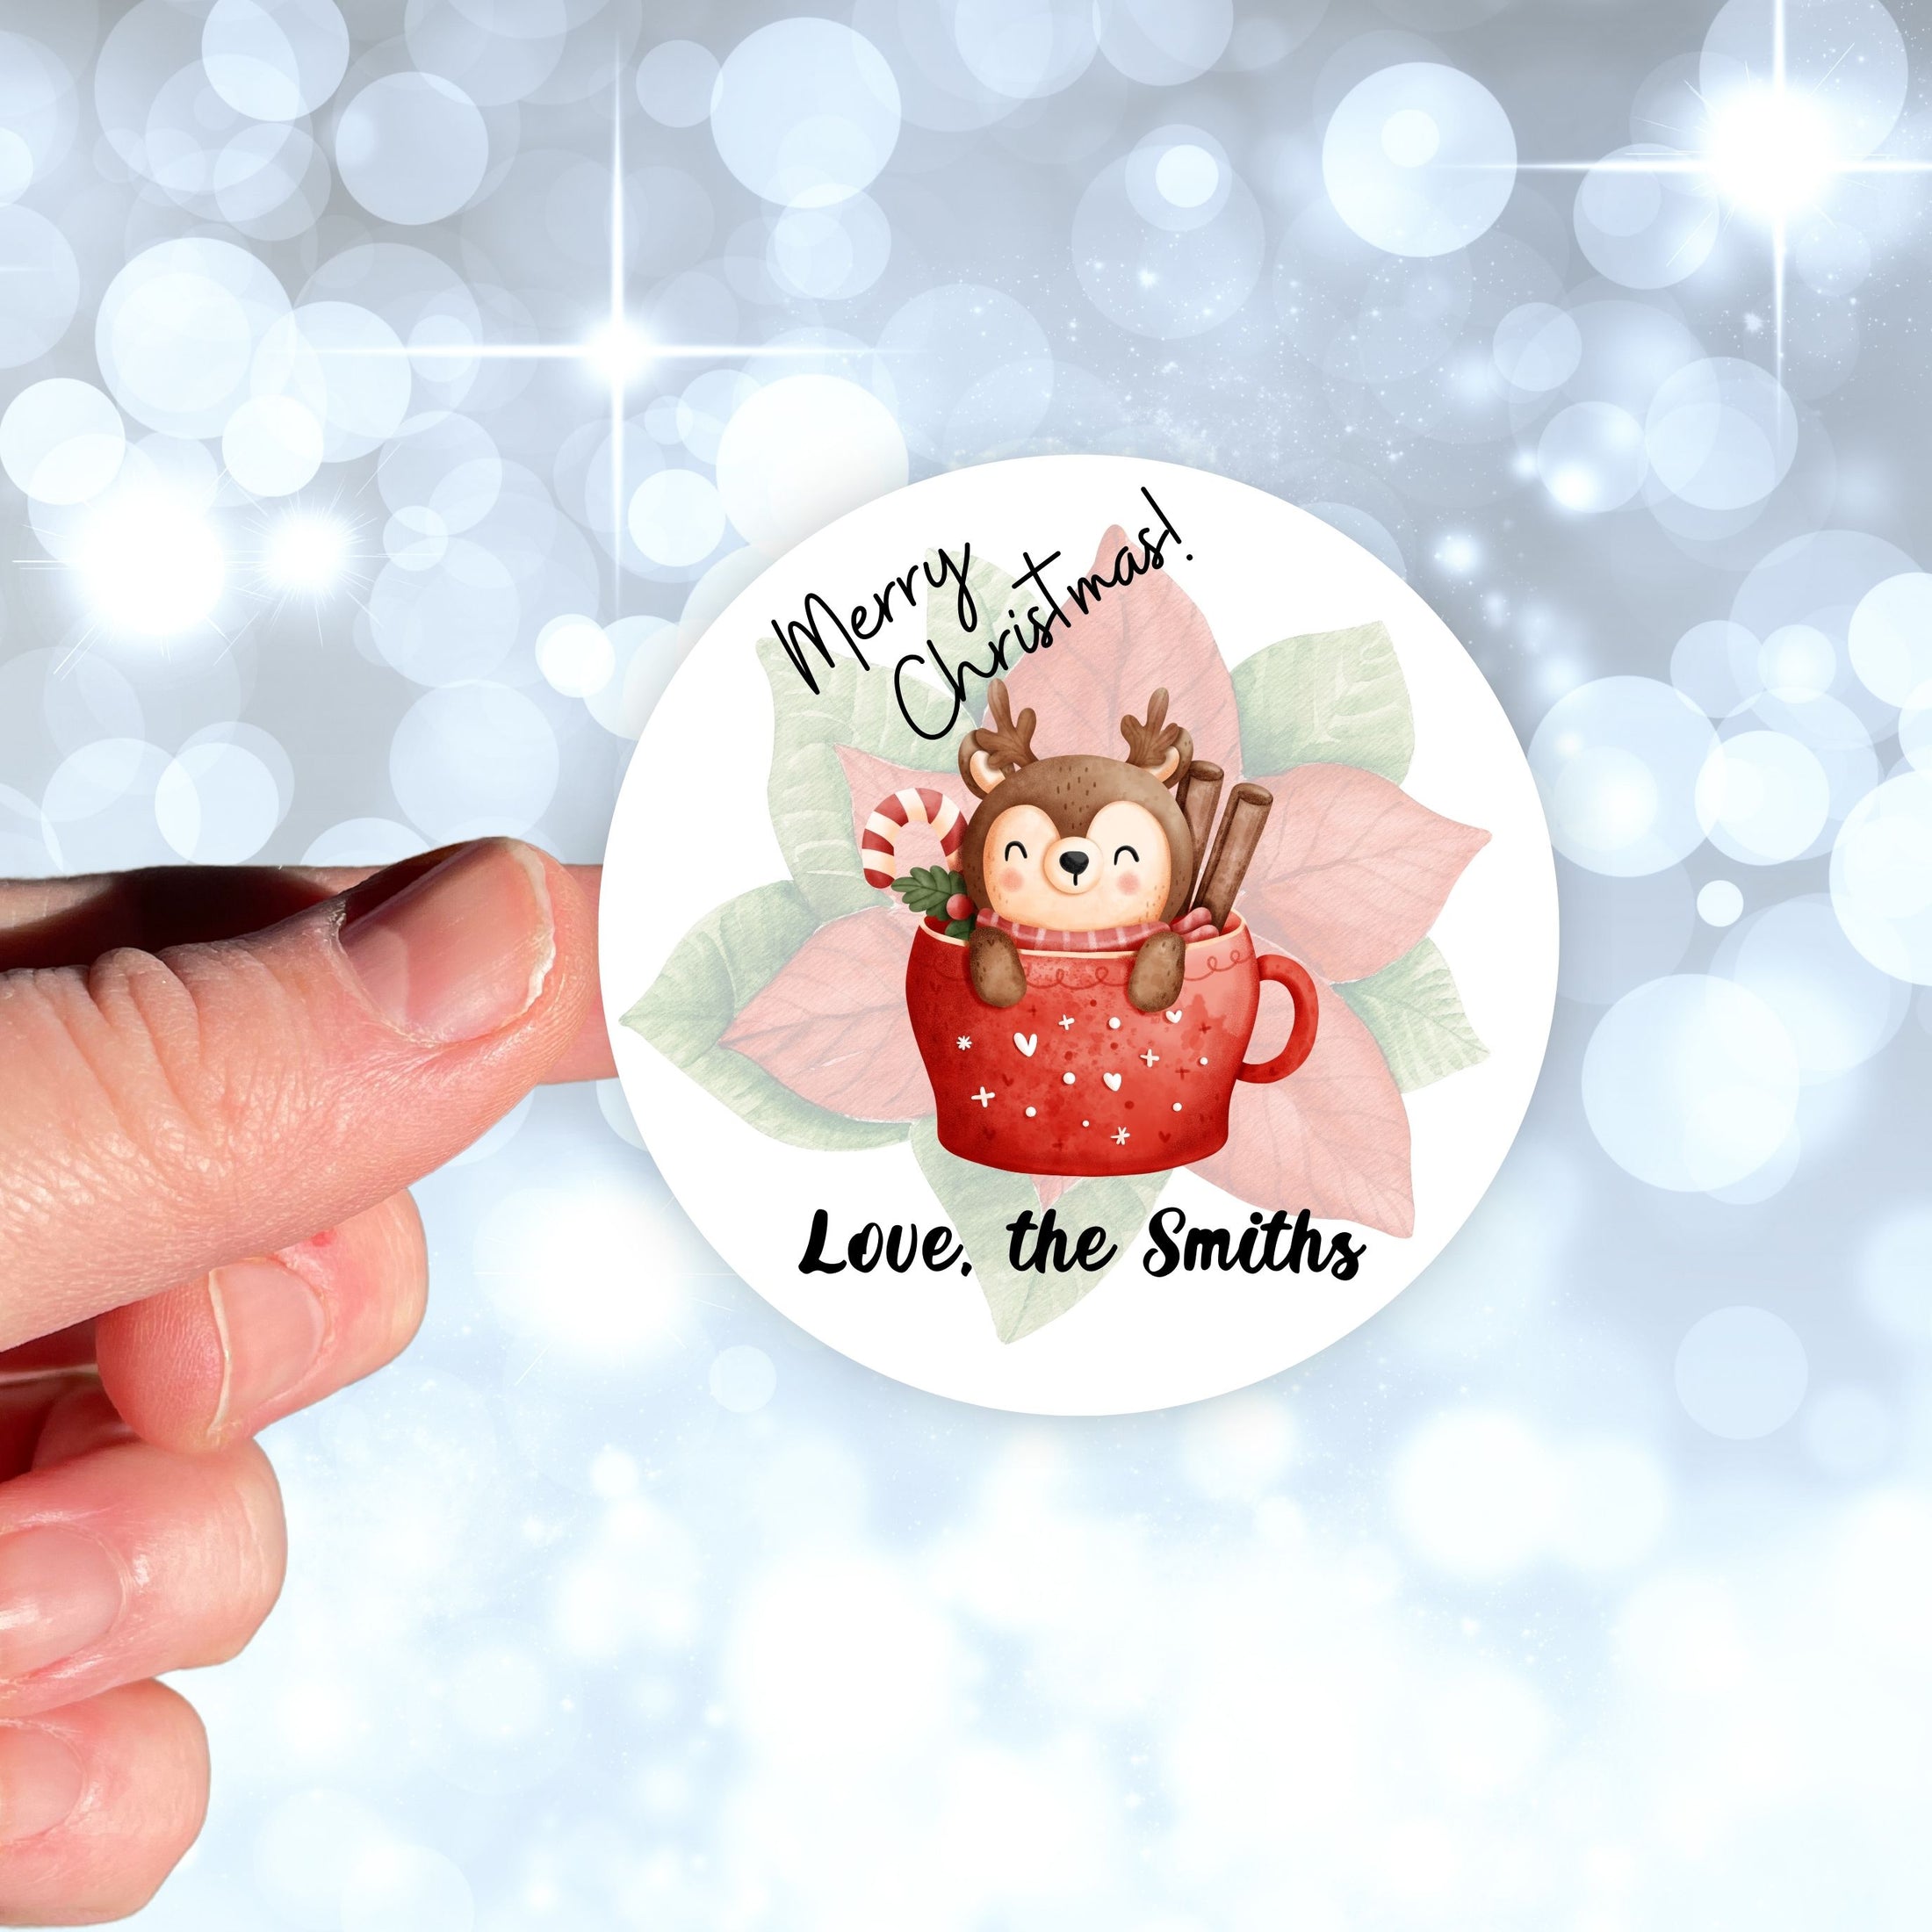 This image shows the personalized holiday sticker being held on one finger over a background of bubbles.